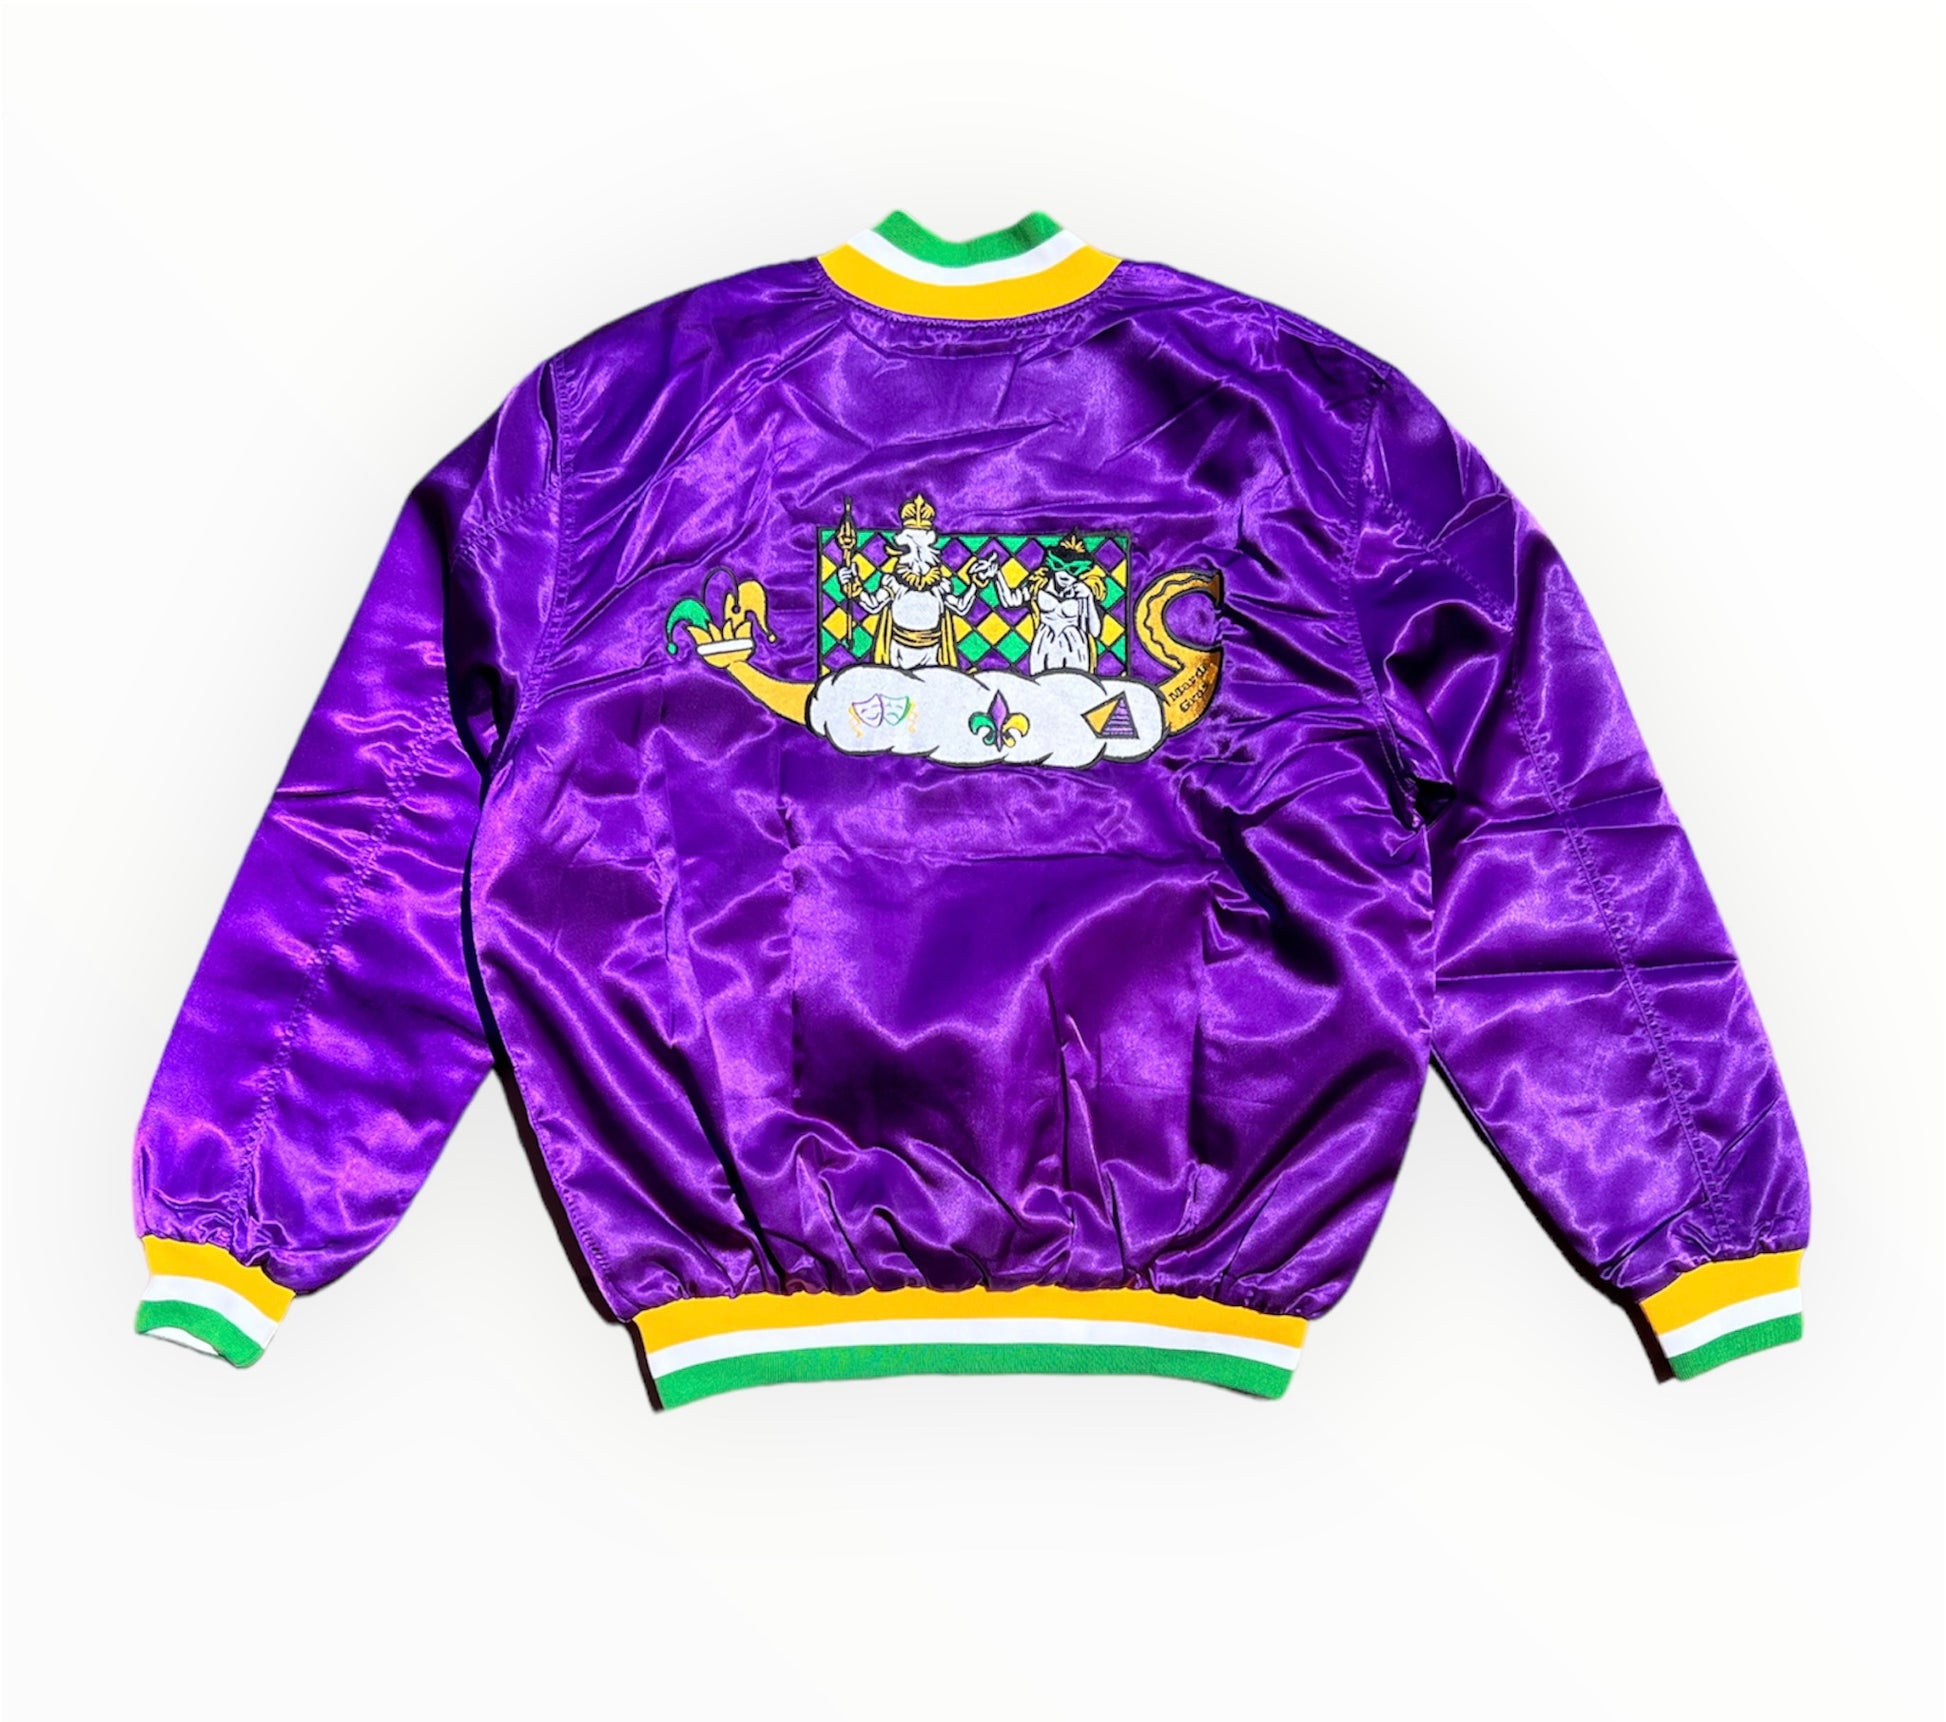 Back View of Royalty10 Mardi Gras '20 Satin Bomber Jacket in Regal Purple with King and Kueen Carnival Embroidery